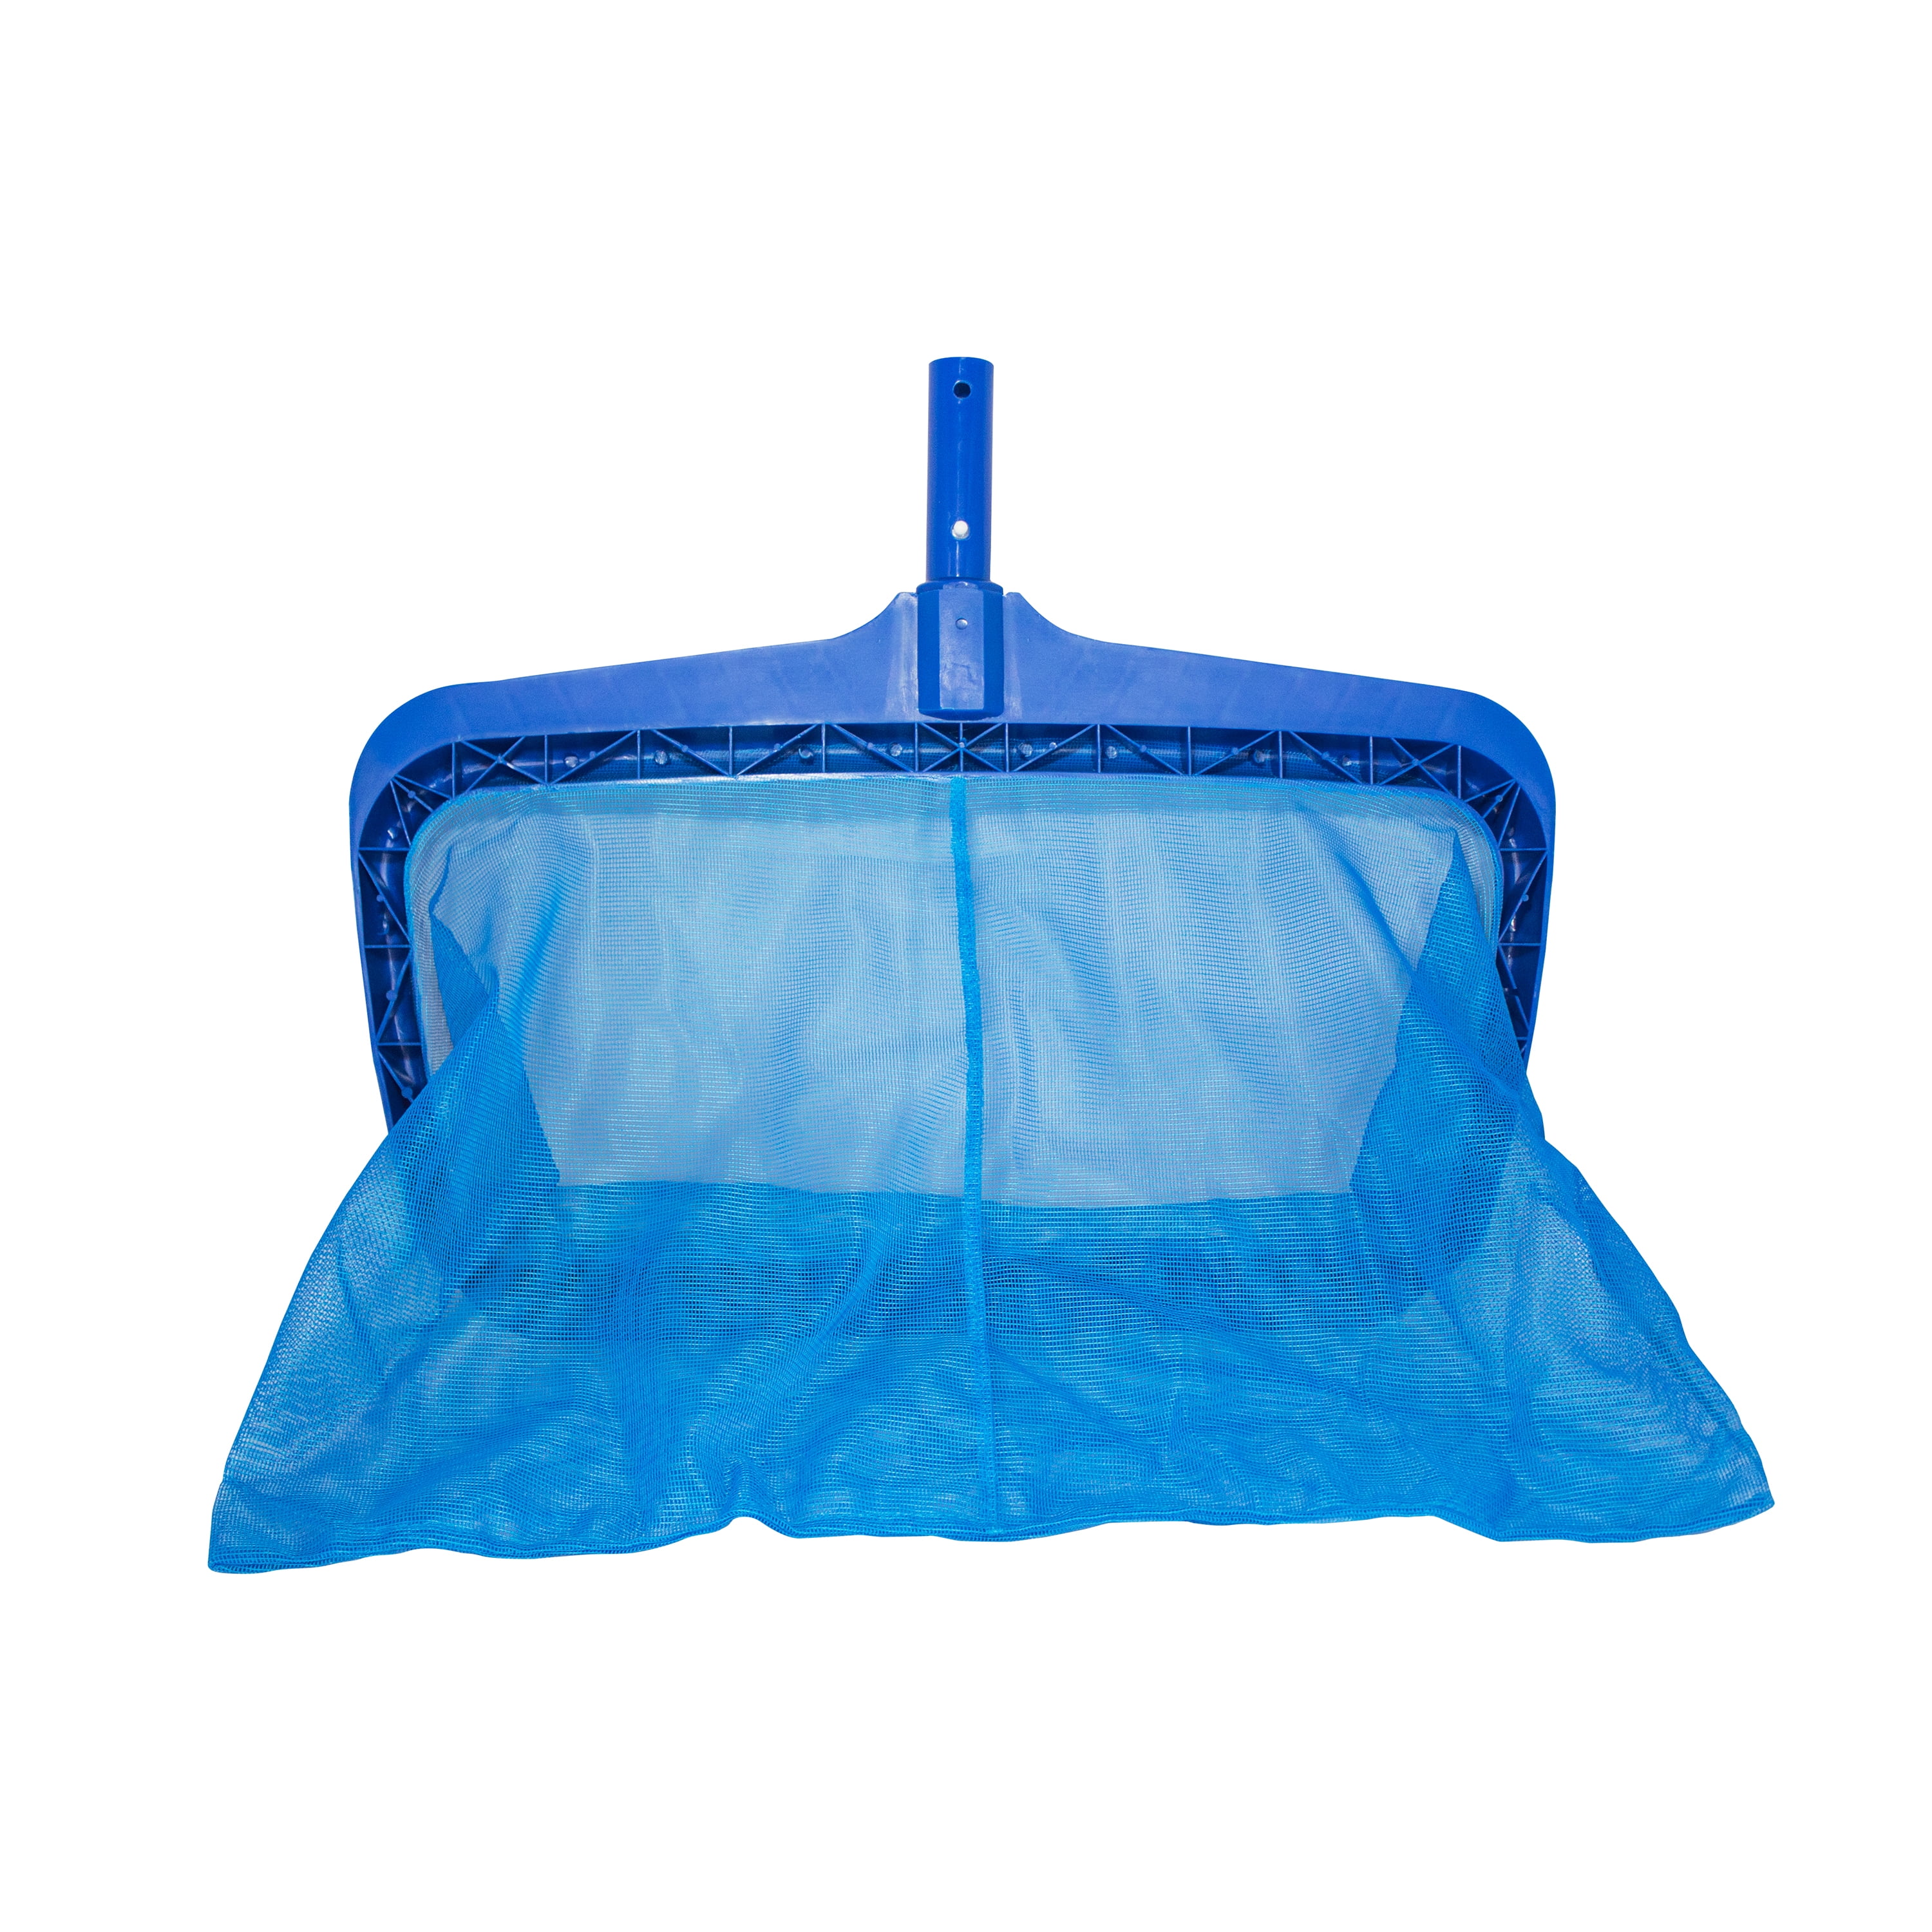 Strong Pole Fine Mesh Bag Removes All Debris! Homga Pro Pool Skimmer Economy Grade with Strong Pole & EZ Clips Included for Above Ground & Inground Swimming Pools 